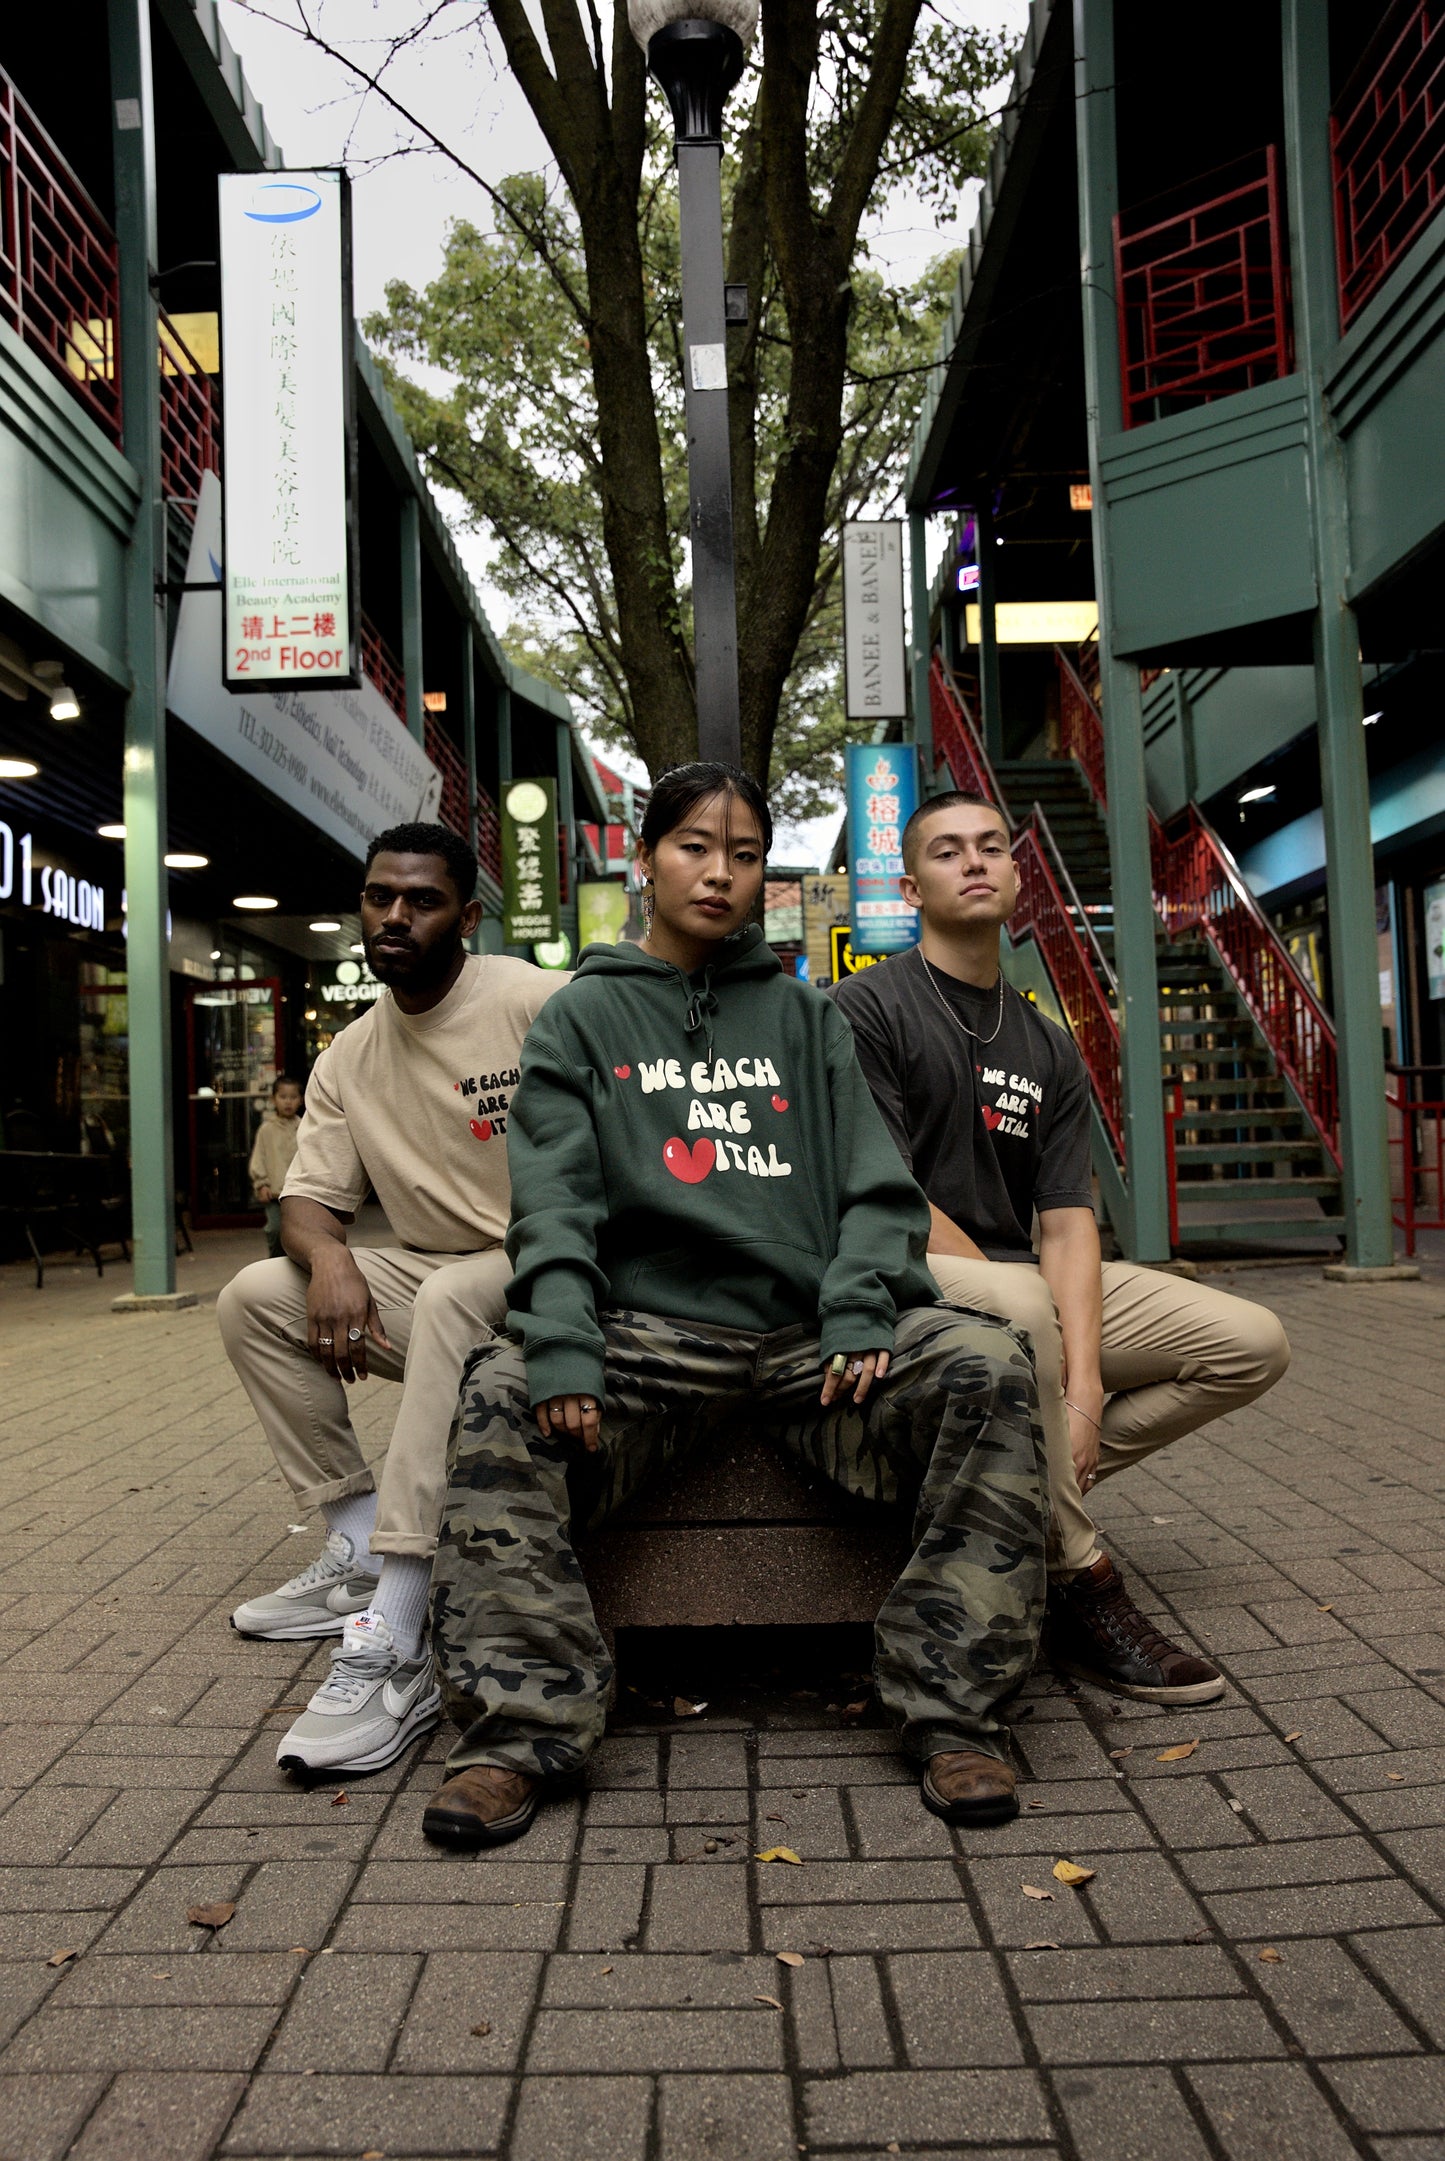 We Each Are Vital Hoodie "Forest Green"